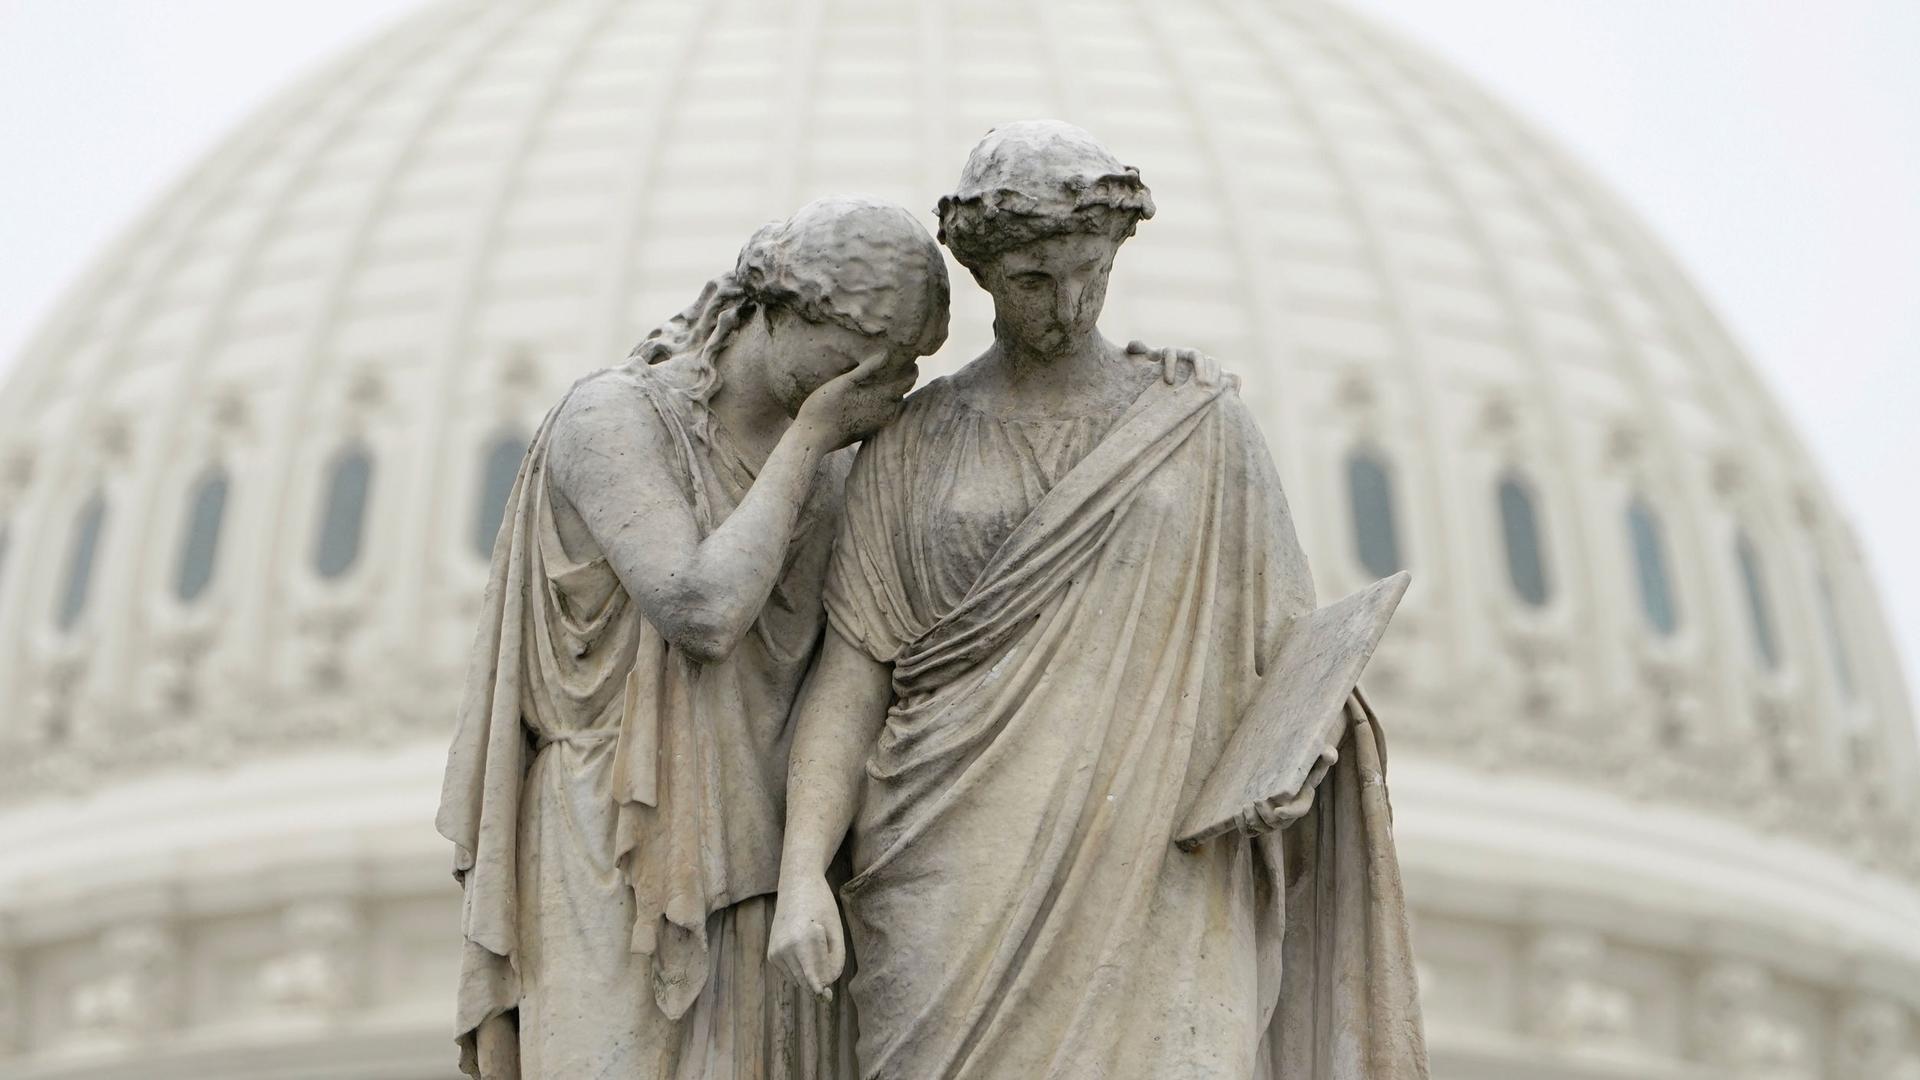 A statue is shown depicting two women with one holding her hand to her face and the other holding a book.